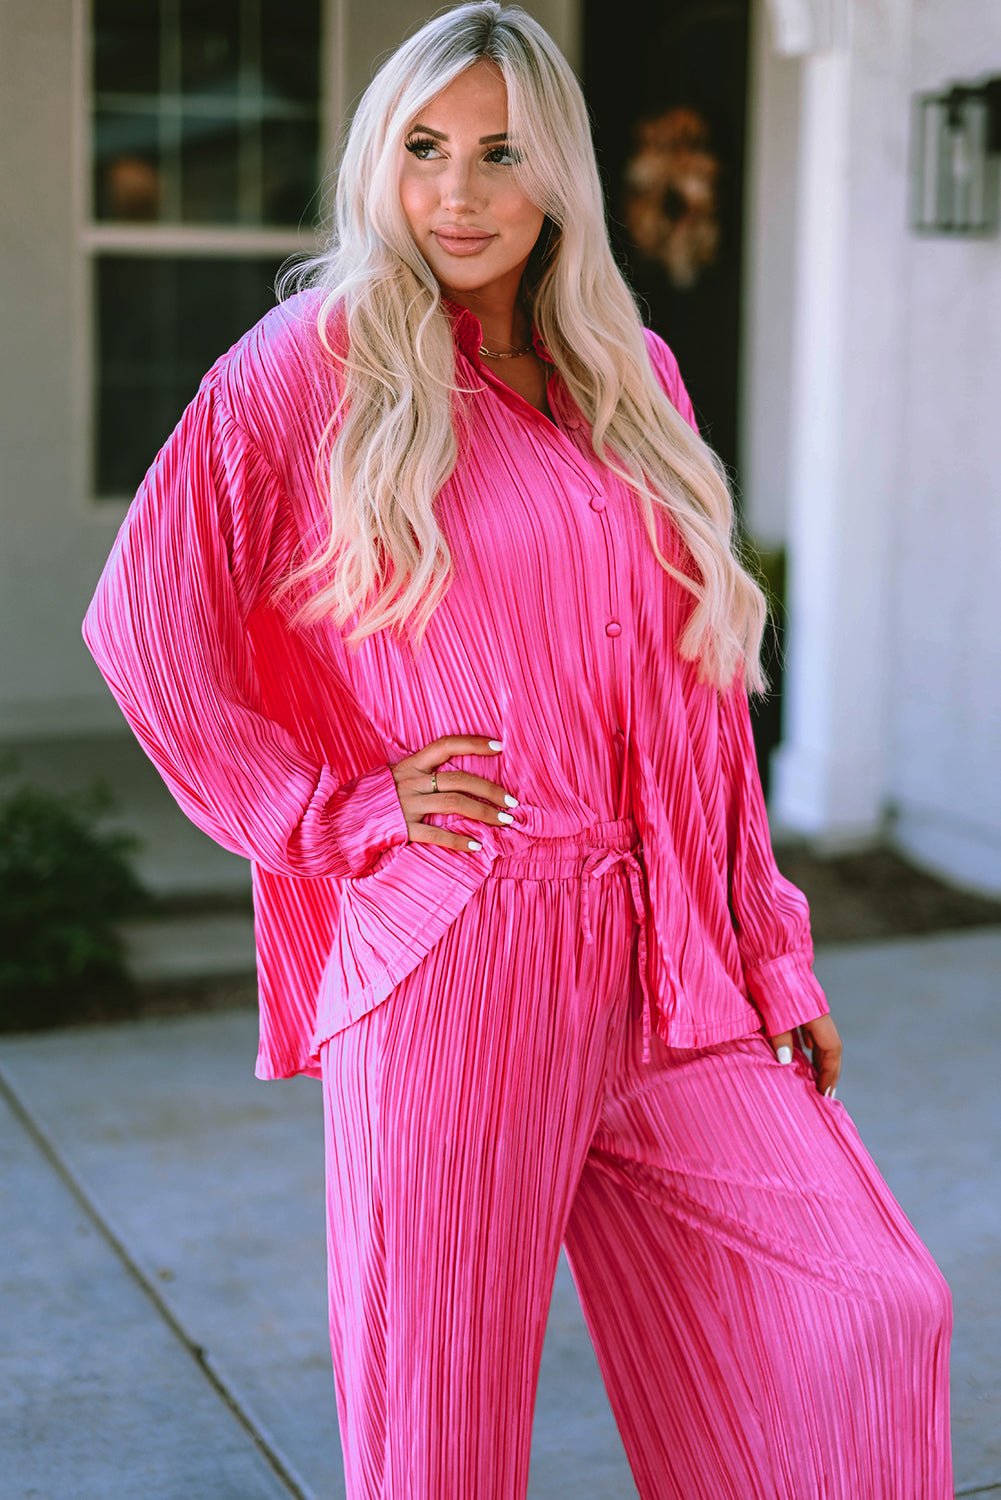 Rose Pleated Long Sleeve Buttoned Drawstring Romper | Fashionsarah.com